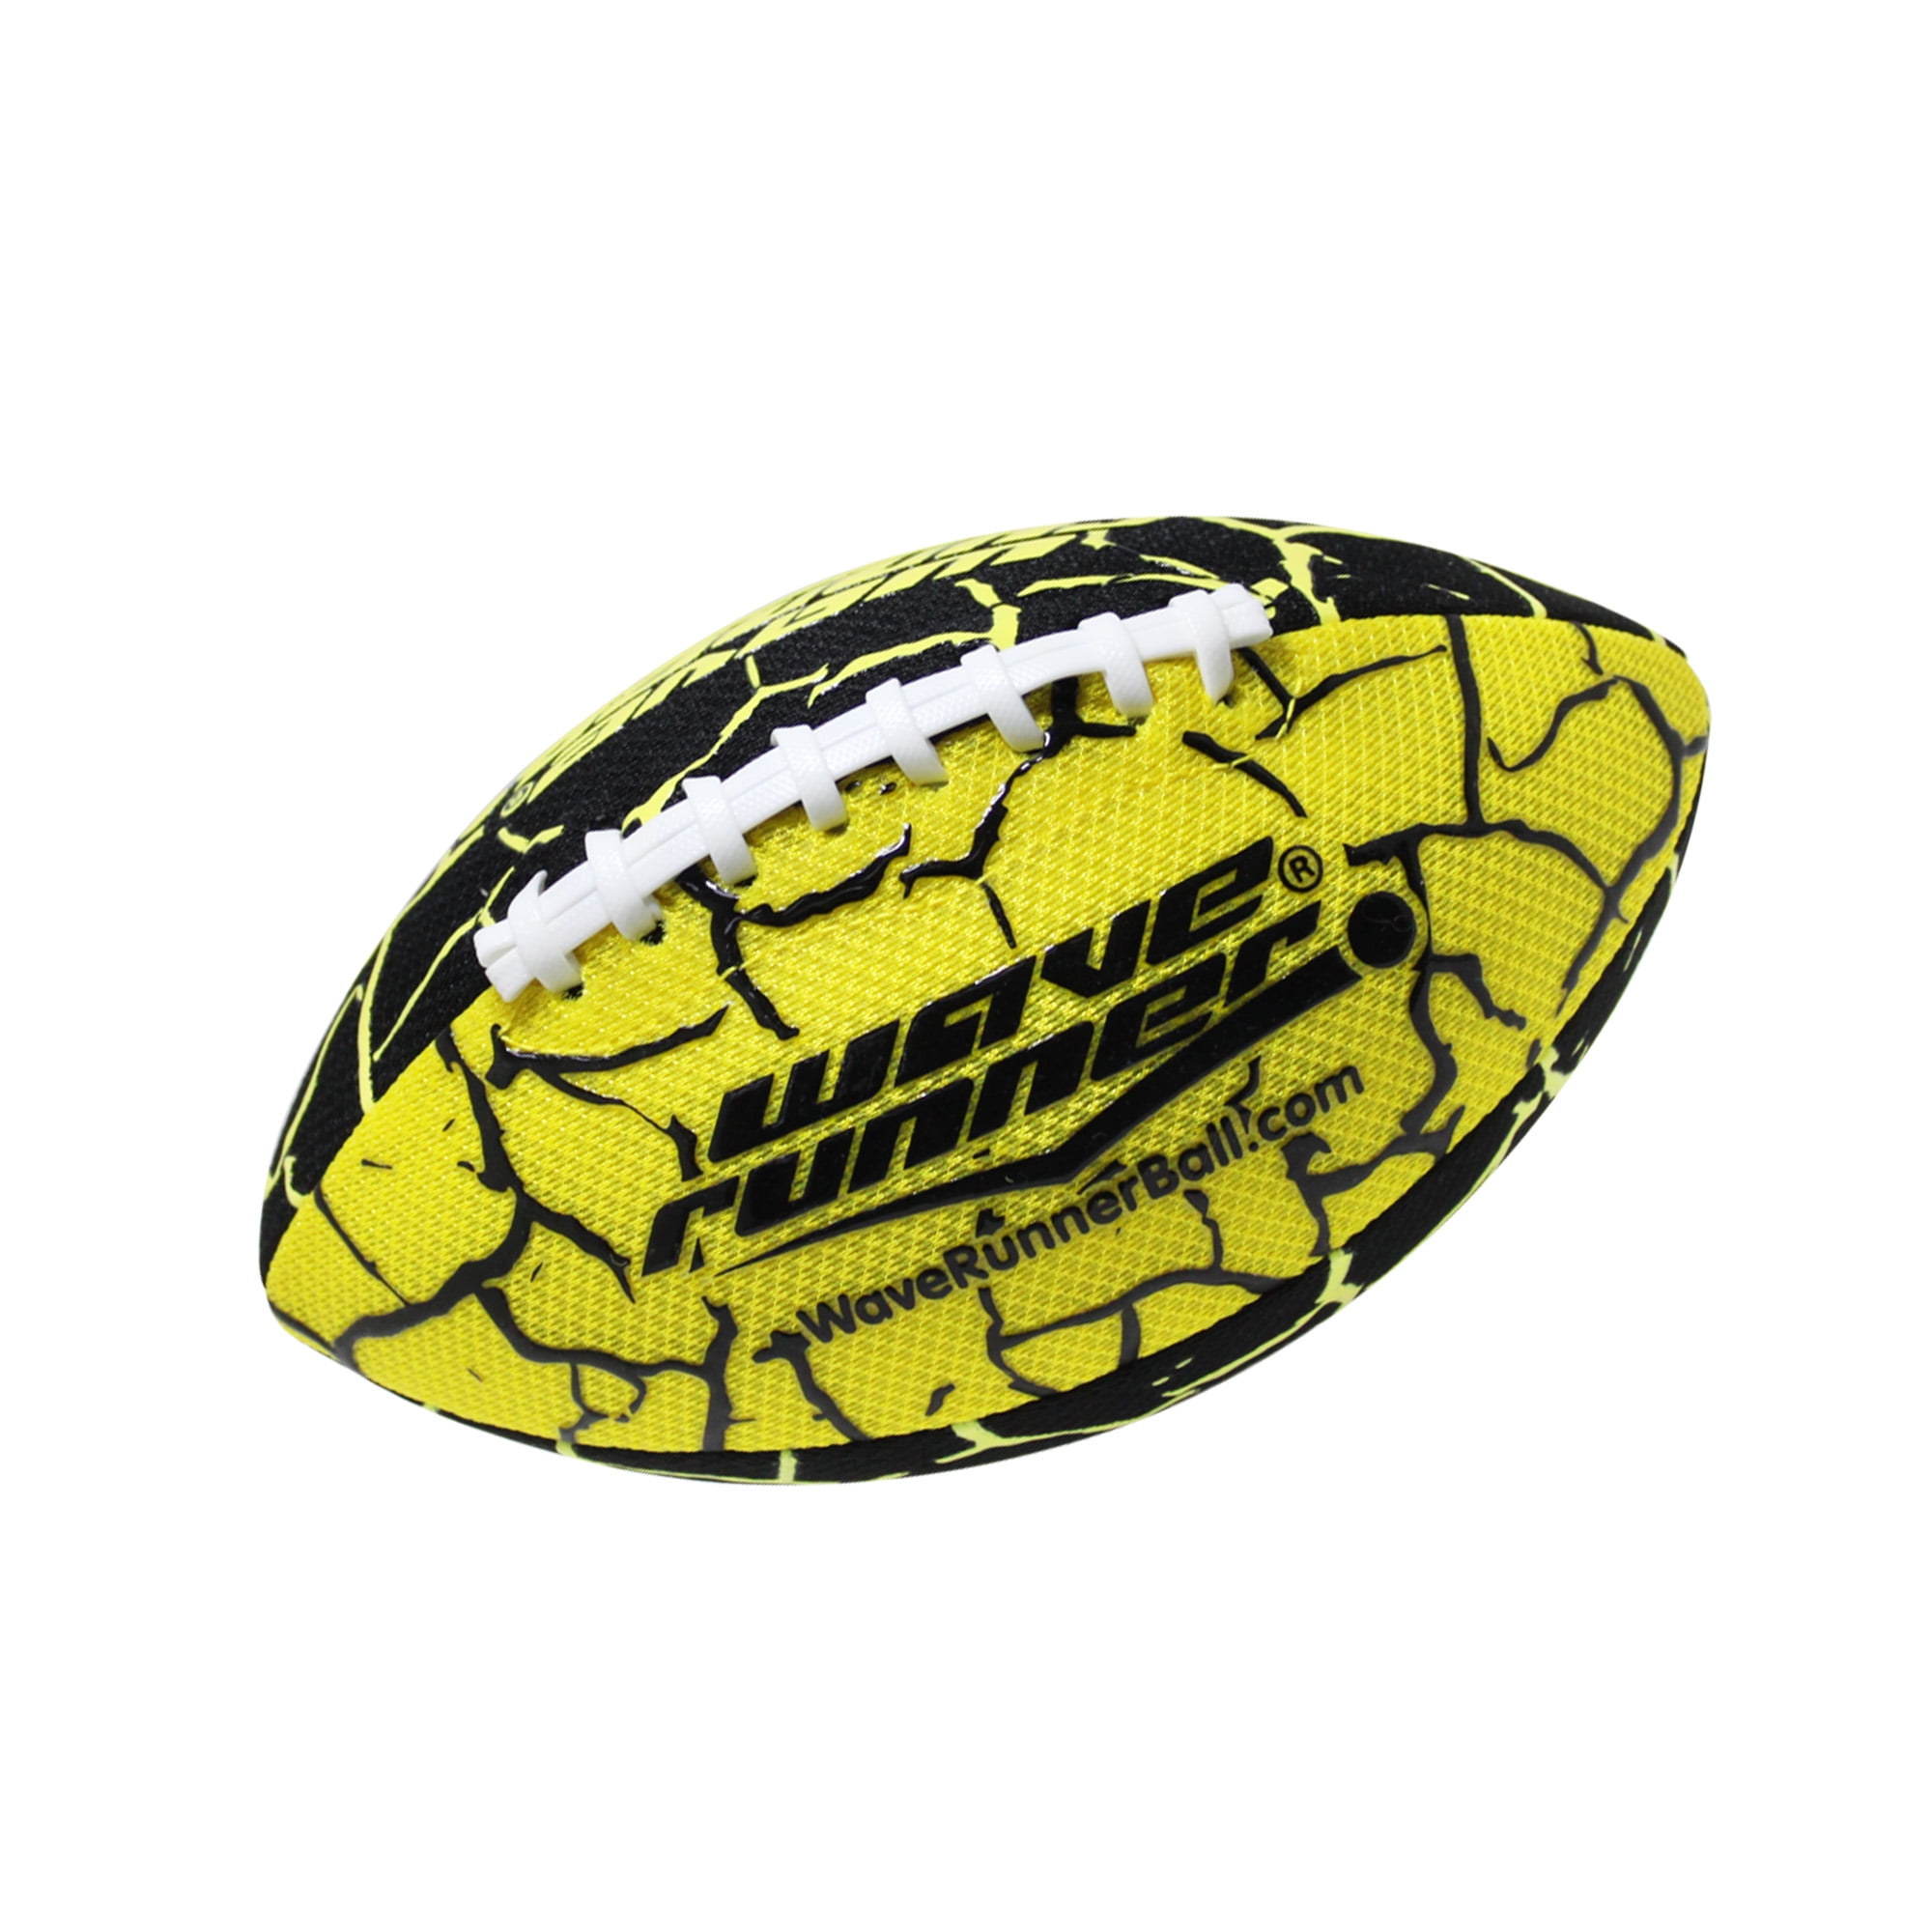 Random Color Wave Runner Grip It Waterproof Football- Size 9.25 Inches with Sure-Grip Technology 3 Pack Lets Play Football in The Water! 